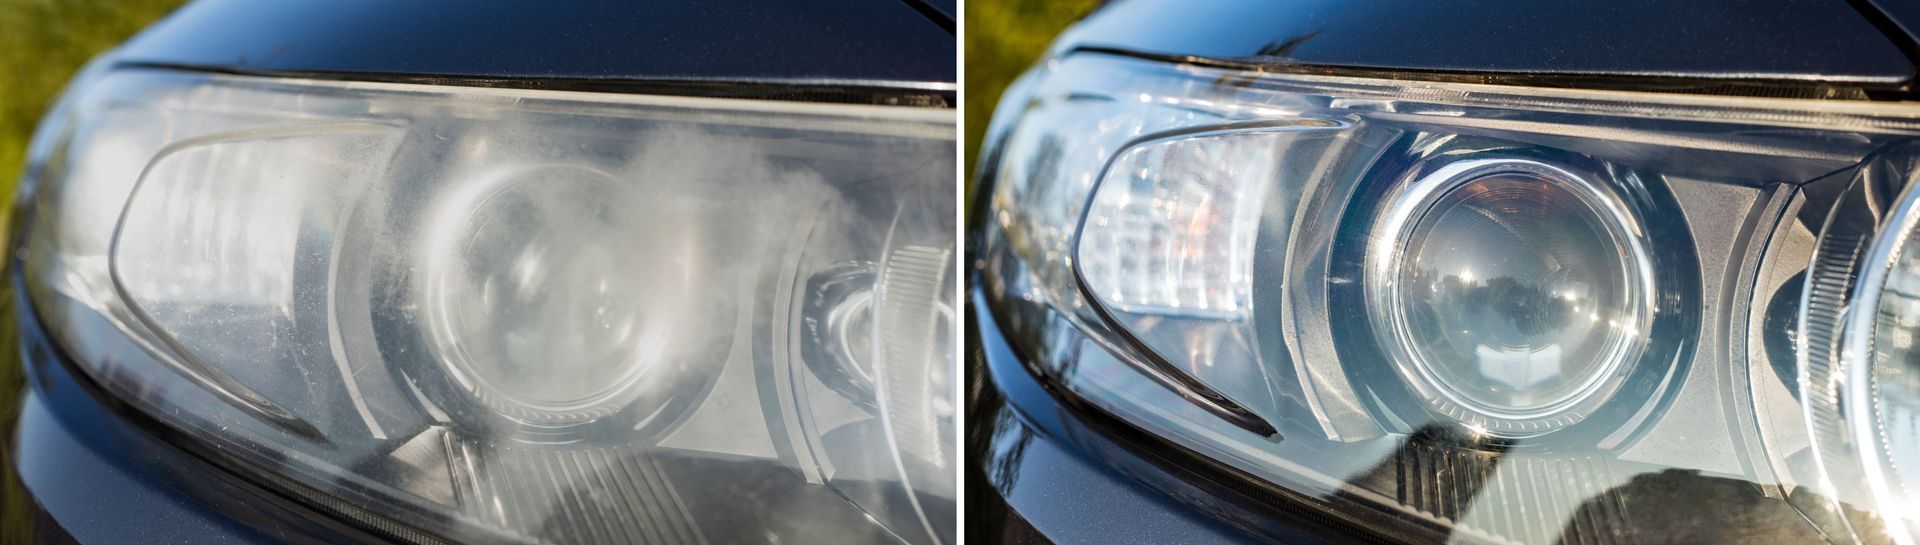 Ocala Car Detailing Before and after picture of headlight restoration